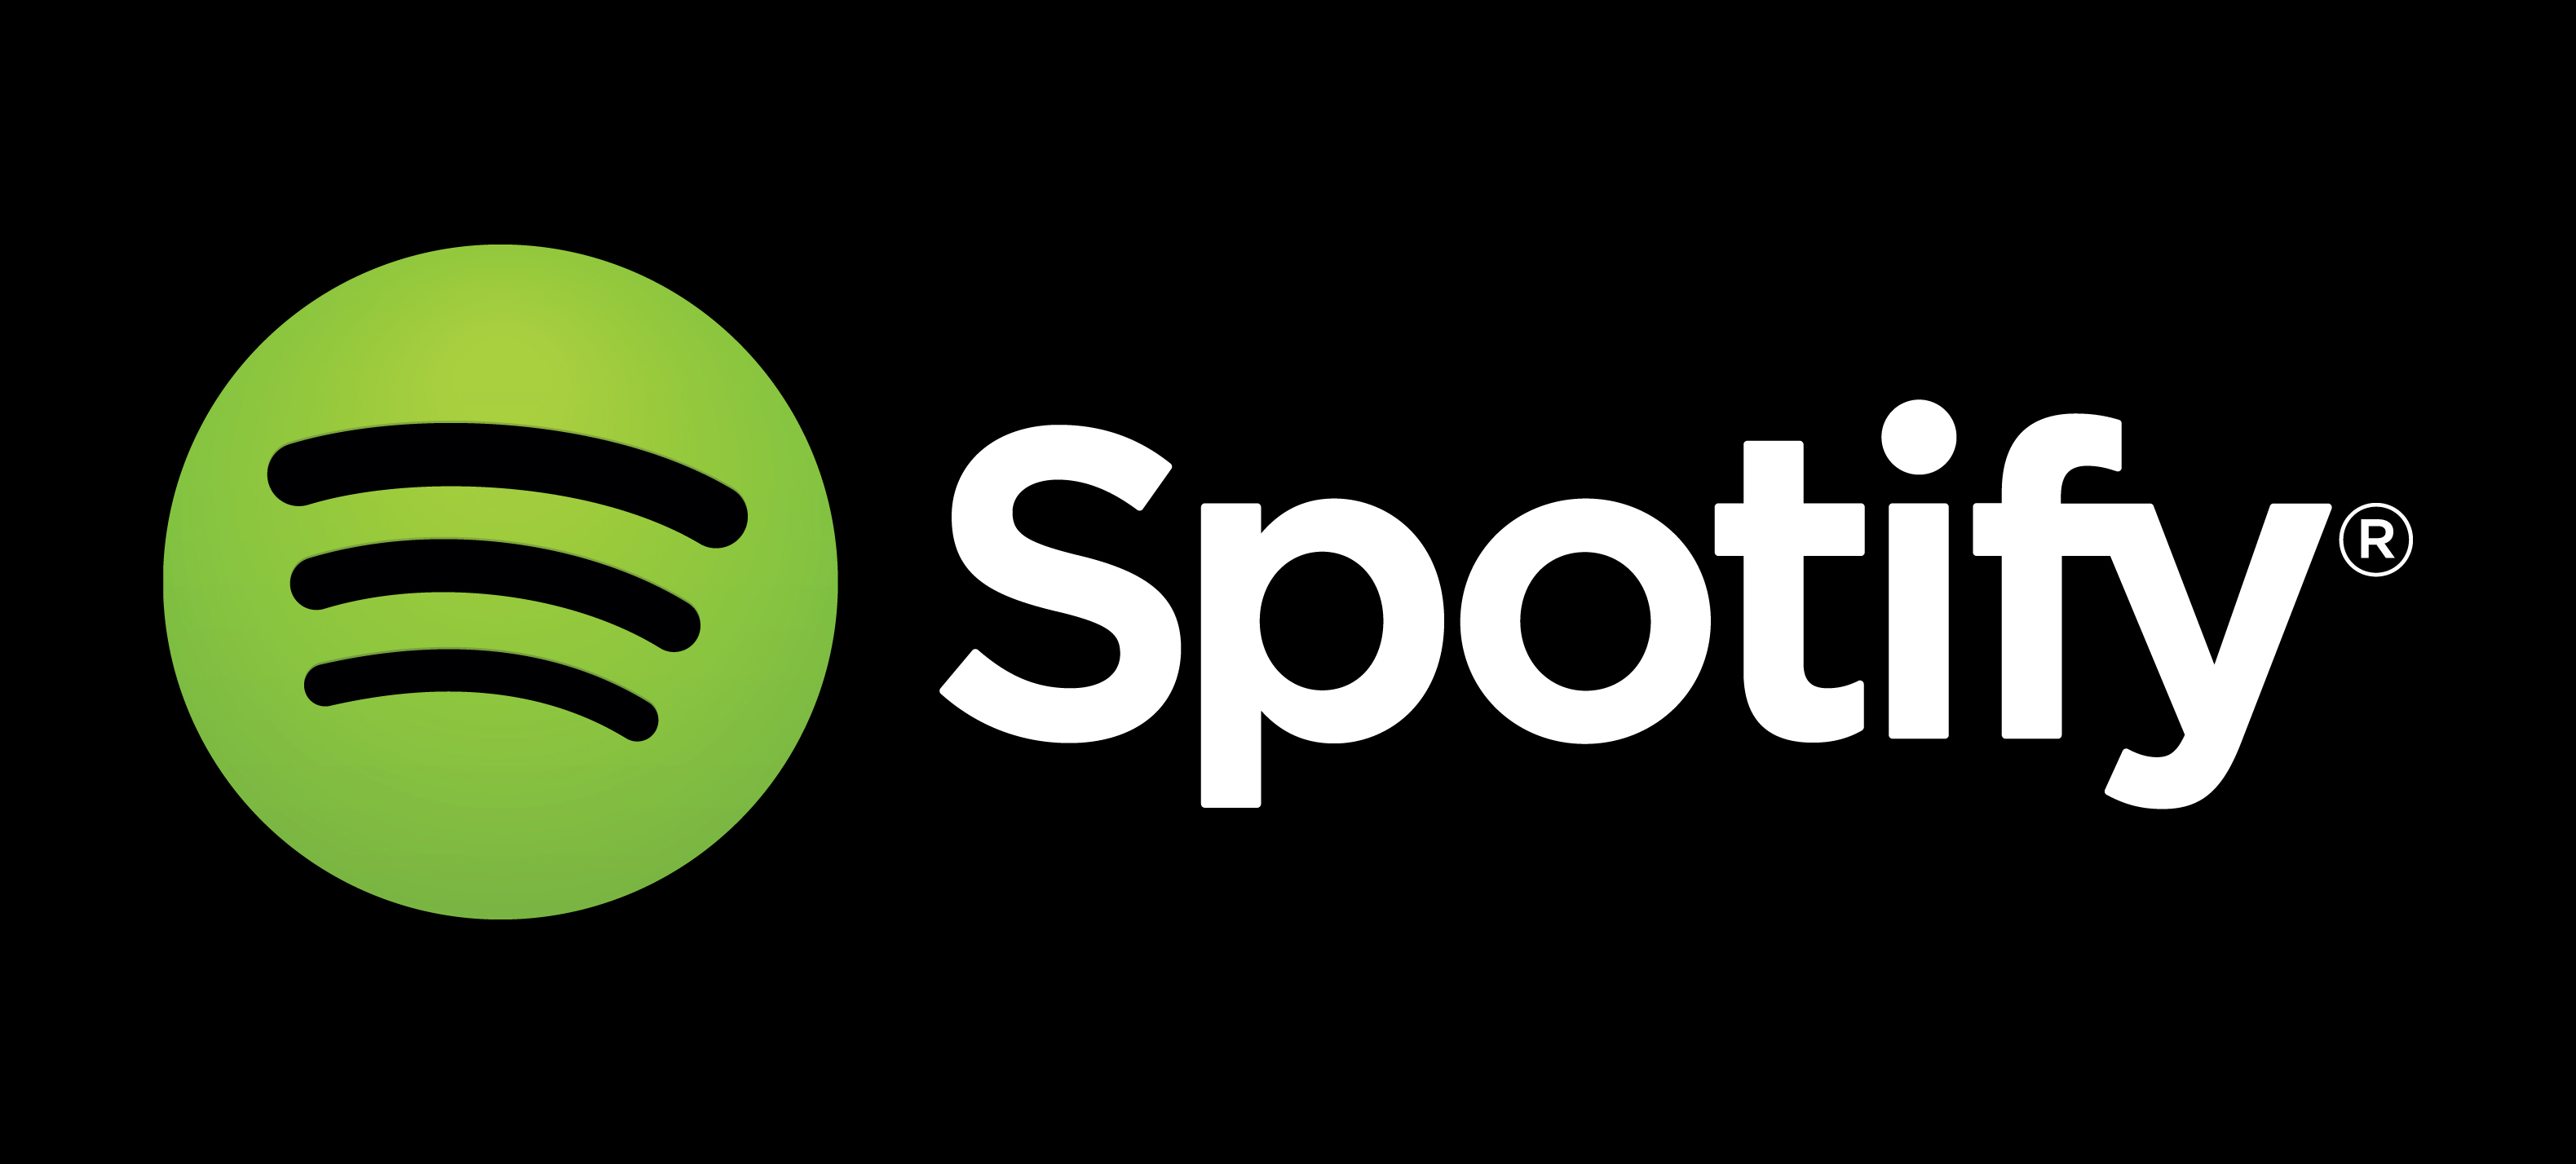 Apple slams Spotify over complaint, says it wouldn't have reached this level without App Store